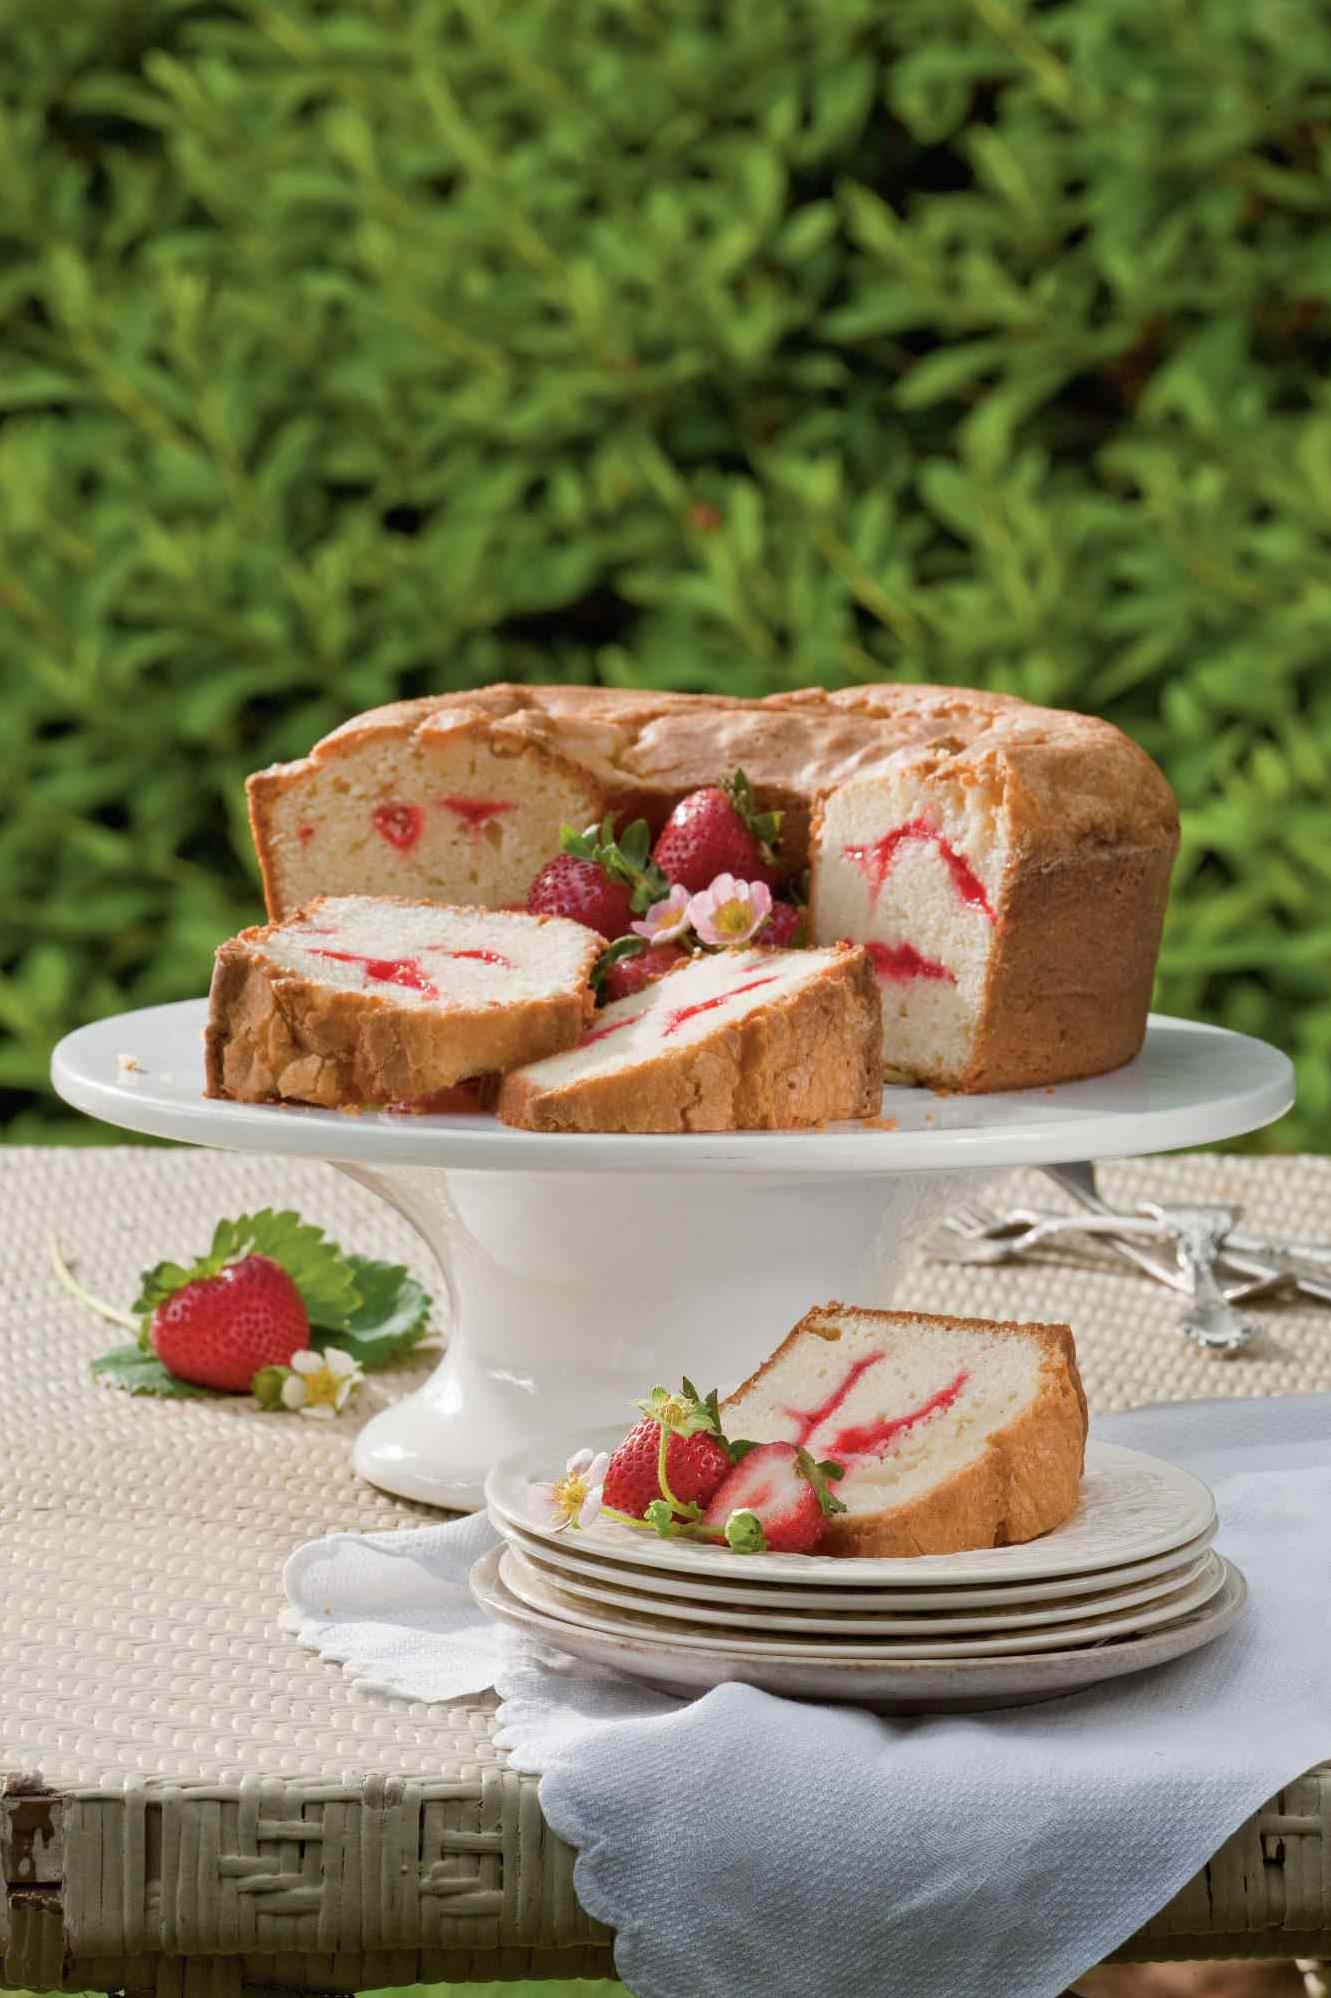  Let the sweet aroma of freshly baked Strawberry Swirl Cream Cheese Pound Cake fill your kitchen!